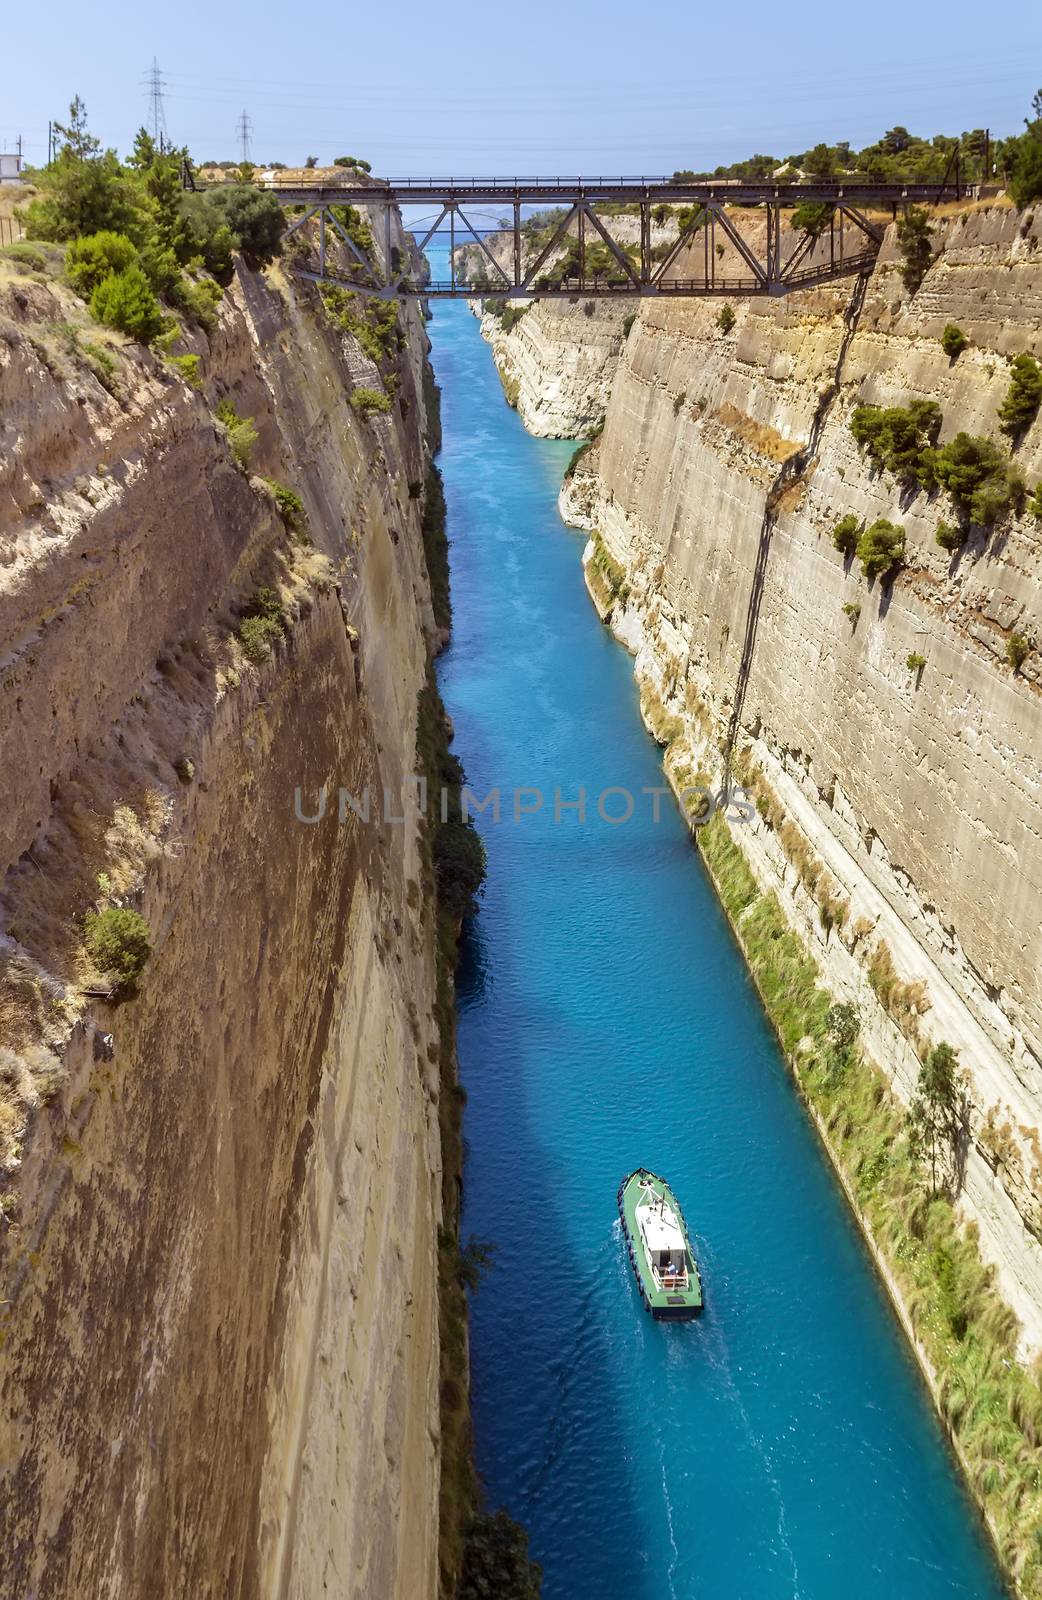 The Corinth Canal is a canal that connects the Gulf of Corinth with the Saronic Gulf in the Aegean Sea.